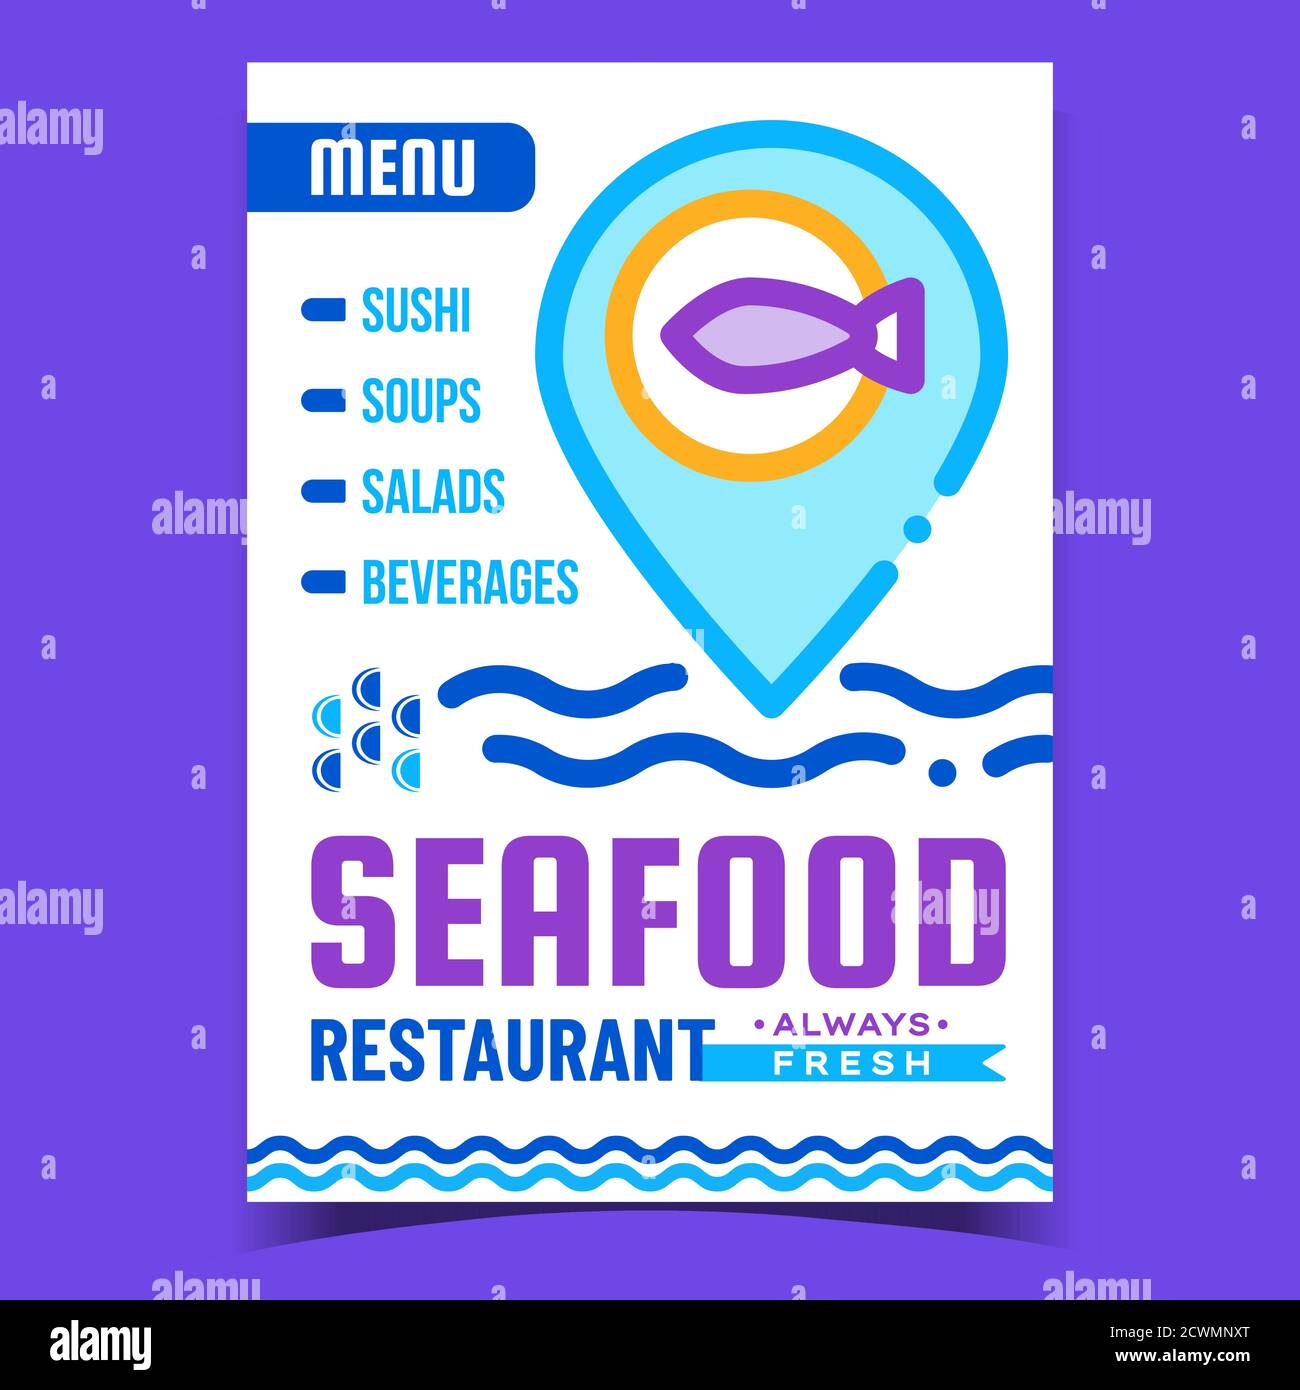 Seafood Restaurant Creative Promo Poster Vector Stock Vector Image ...